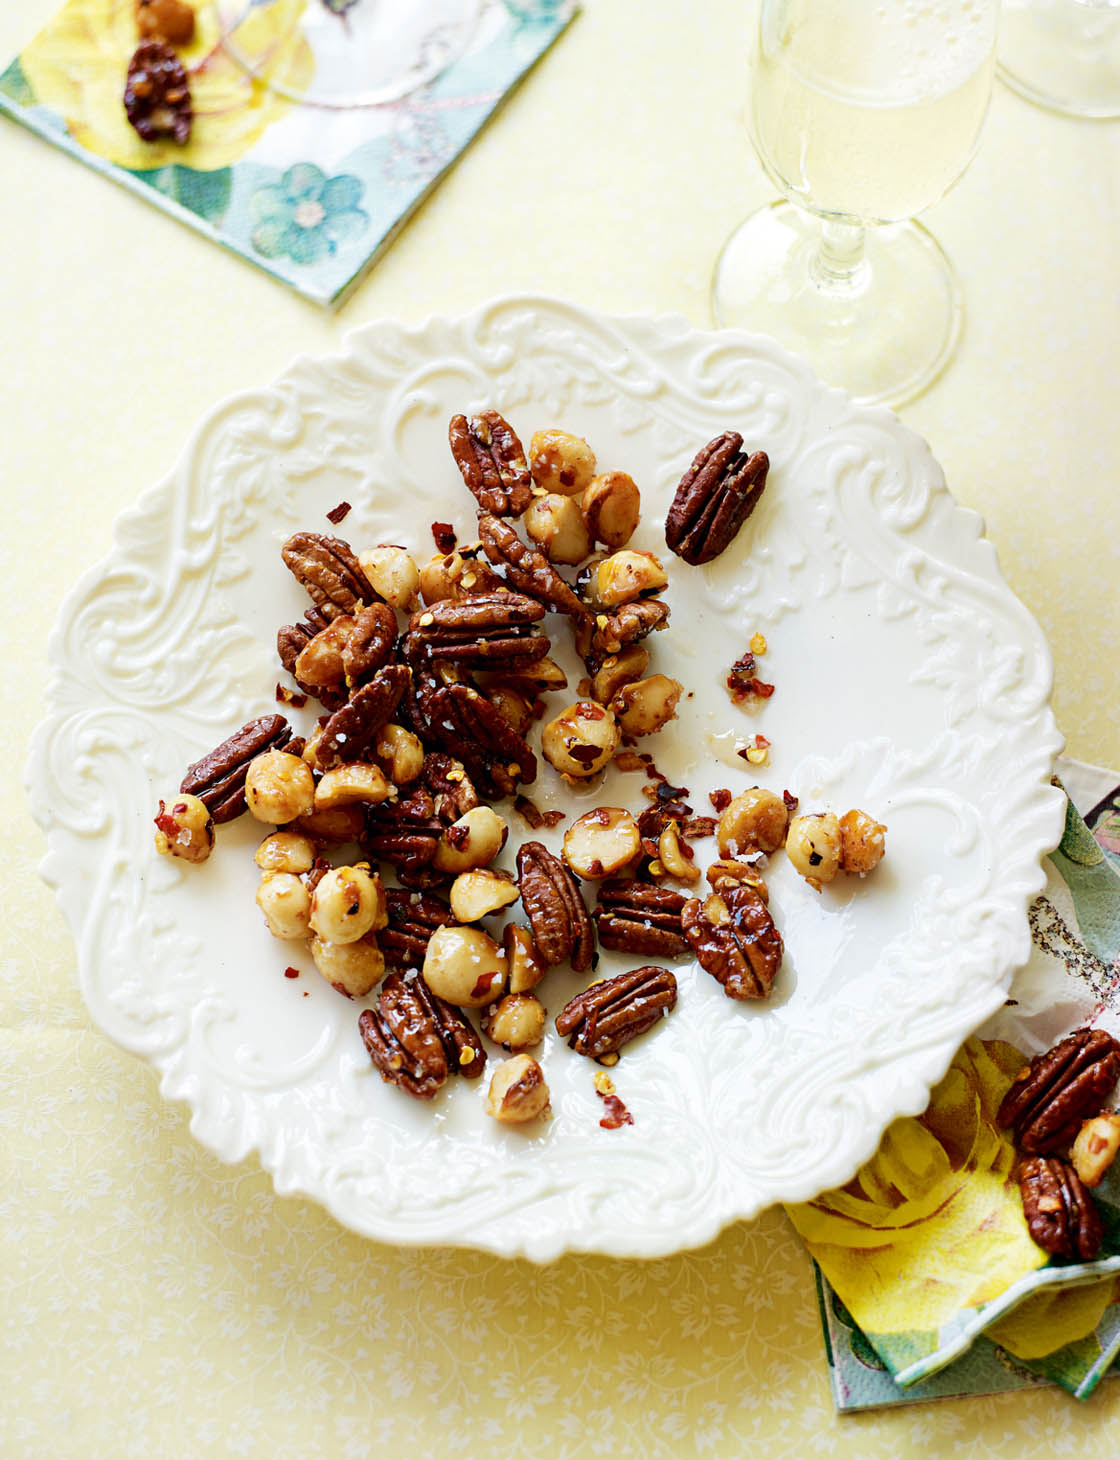 Cayenne-Spiced Roasted Nuts Recipe